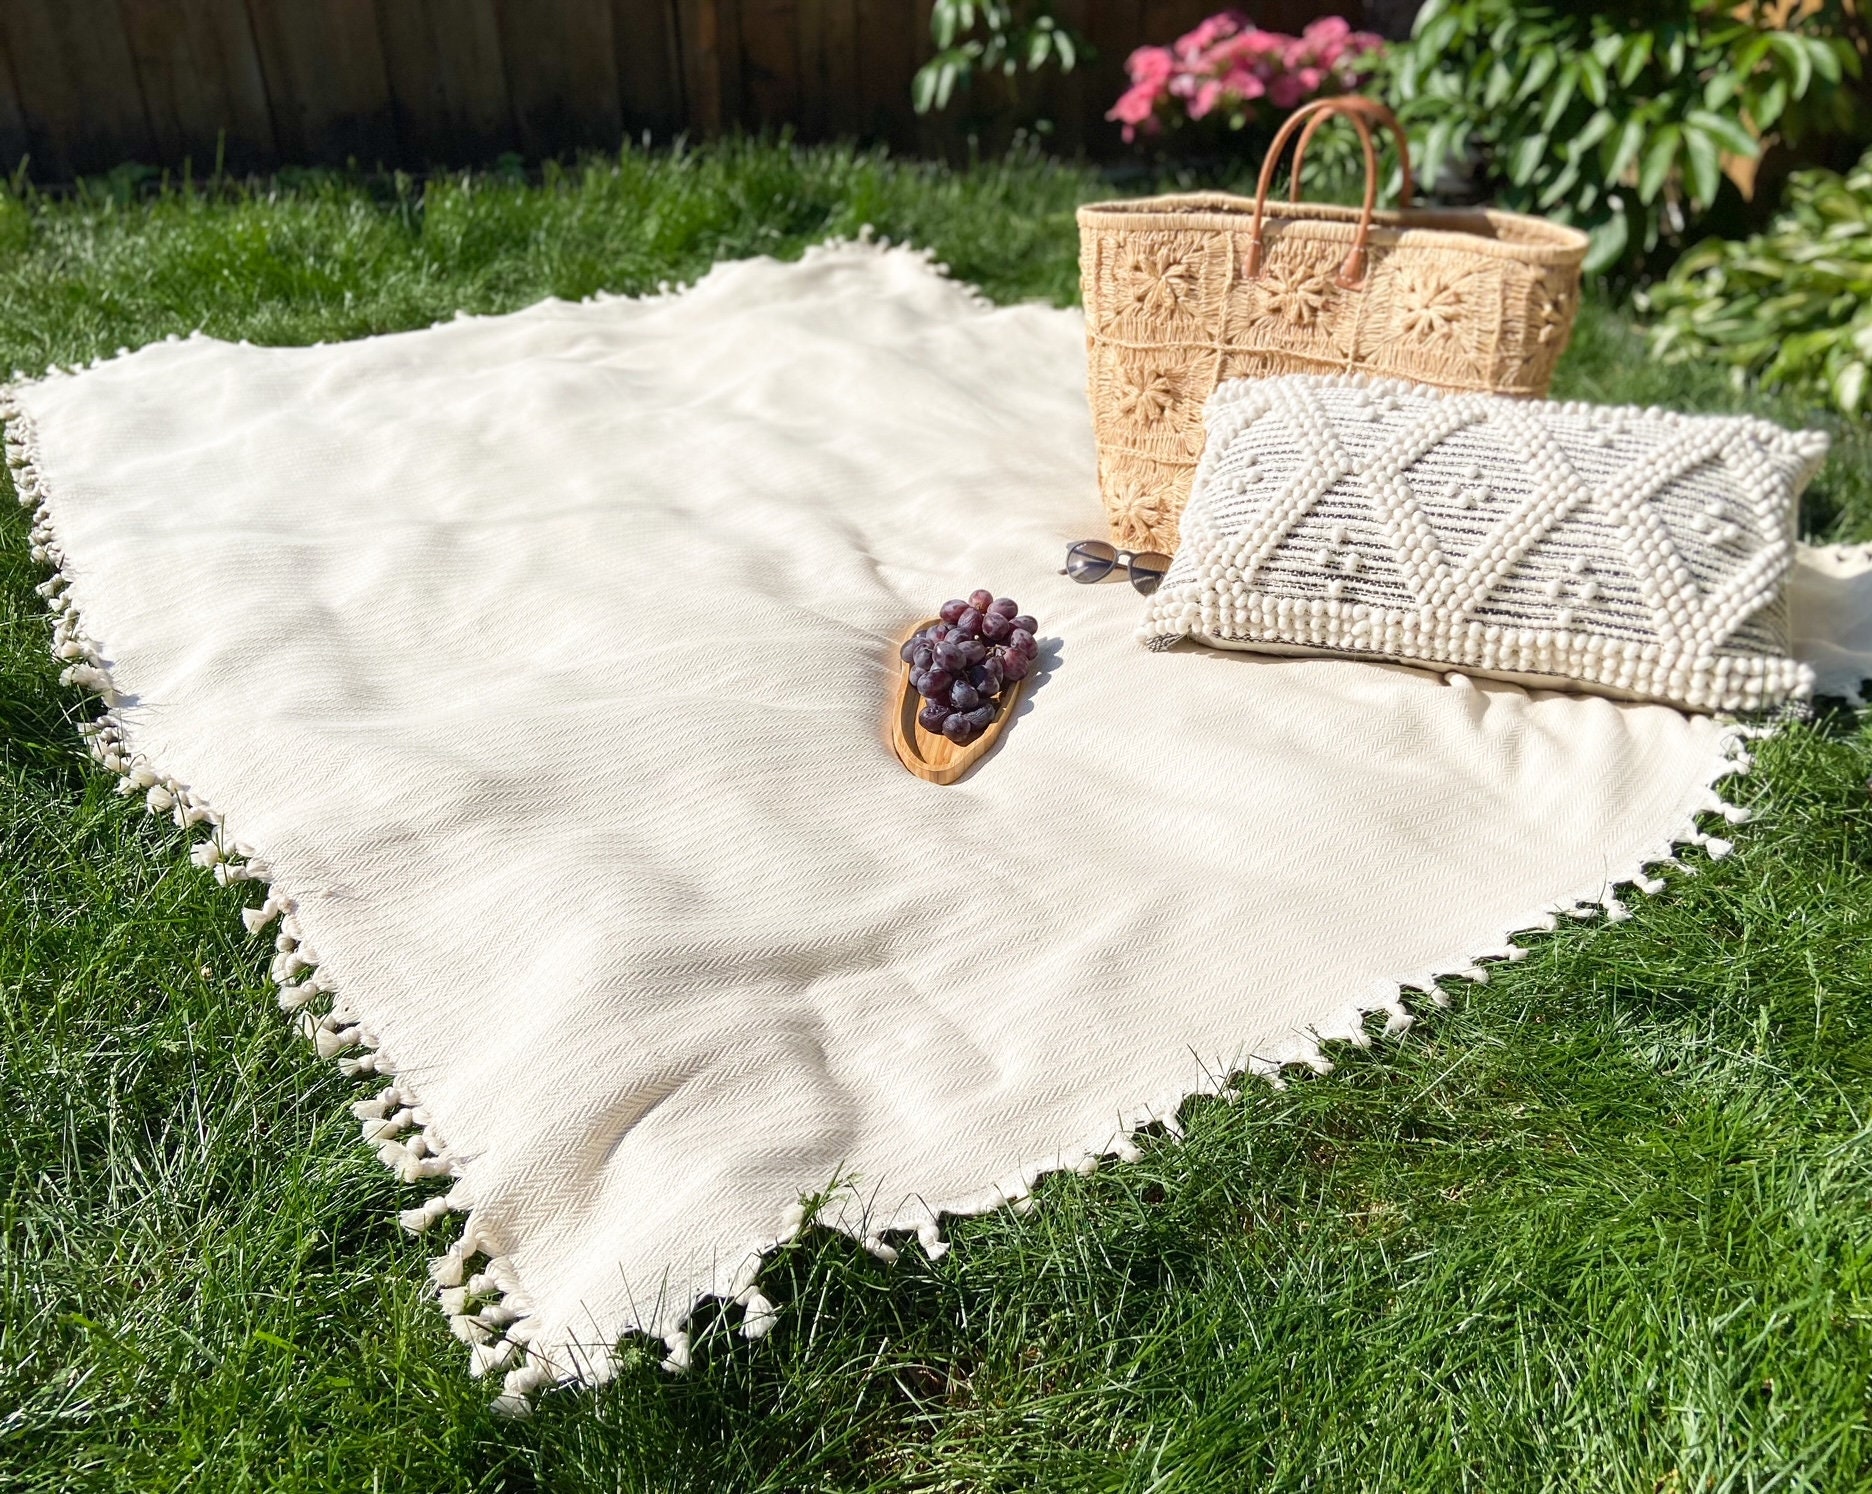 Oversized Cotton Plus Size Travel Gym Camping Blanket Tablecloth